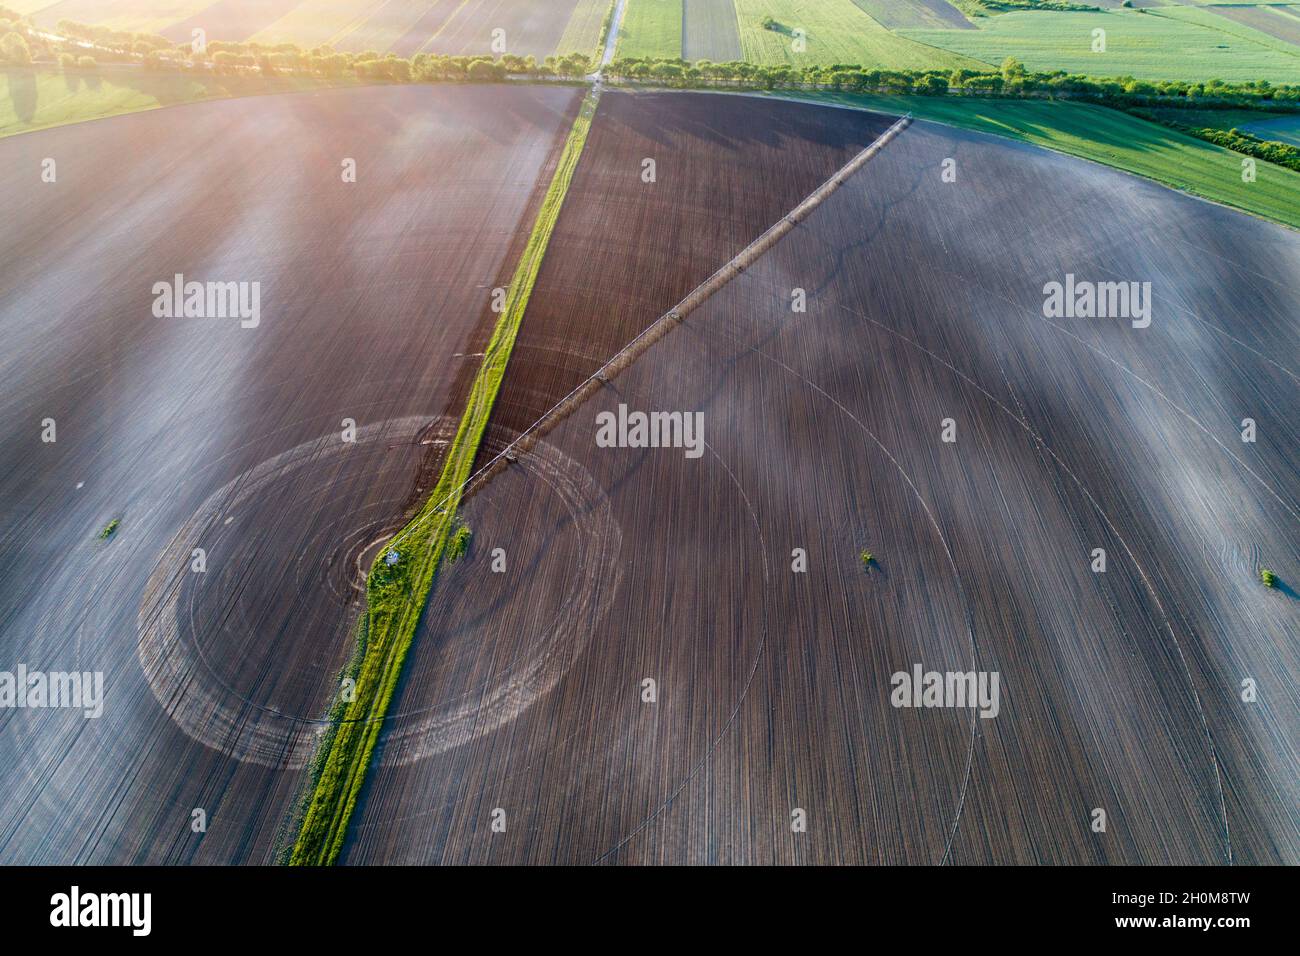 Aerial image of agricultural field with center pivot irrigation systems forming round shape field, shoot from drone Stock Photo